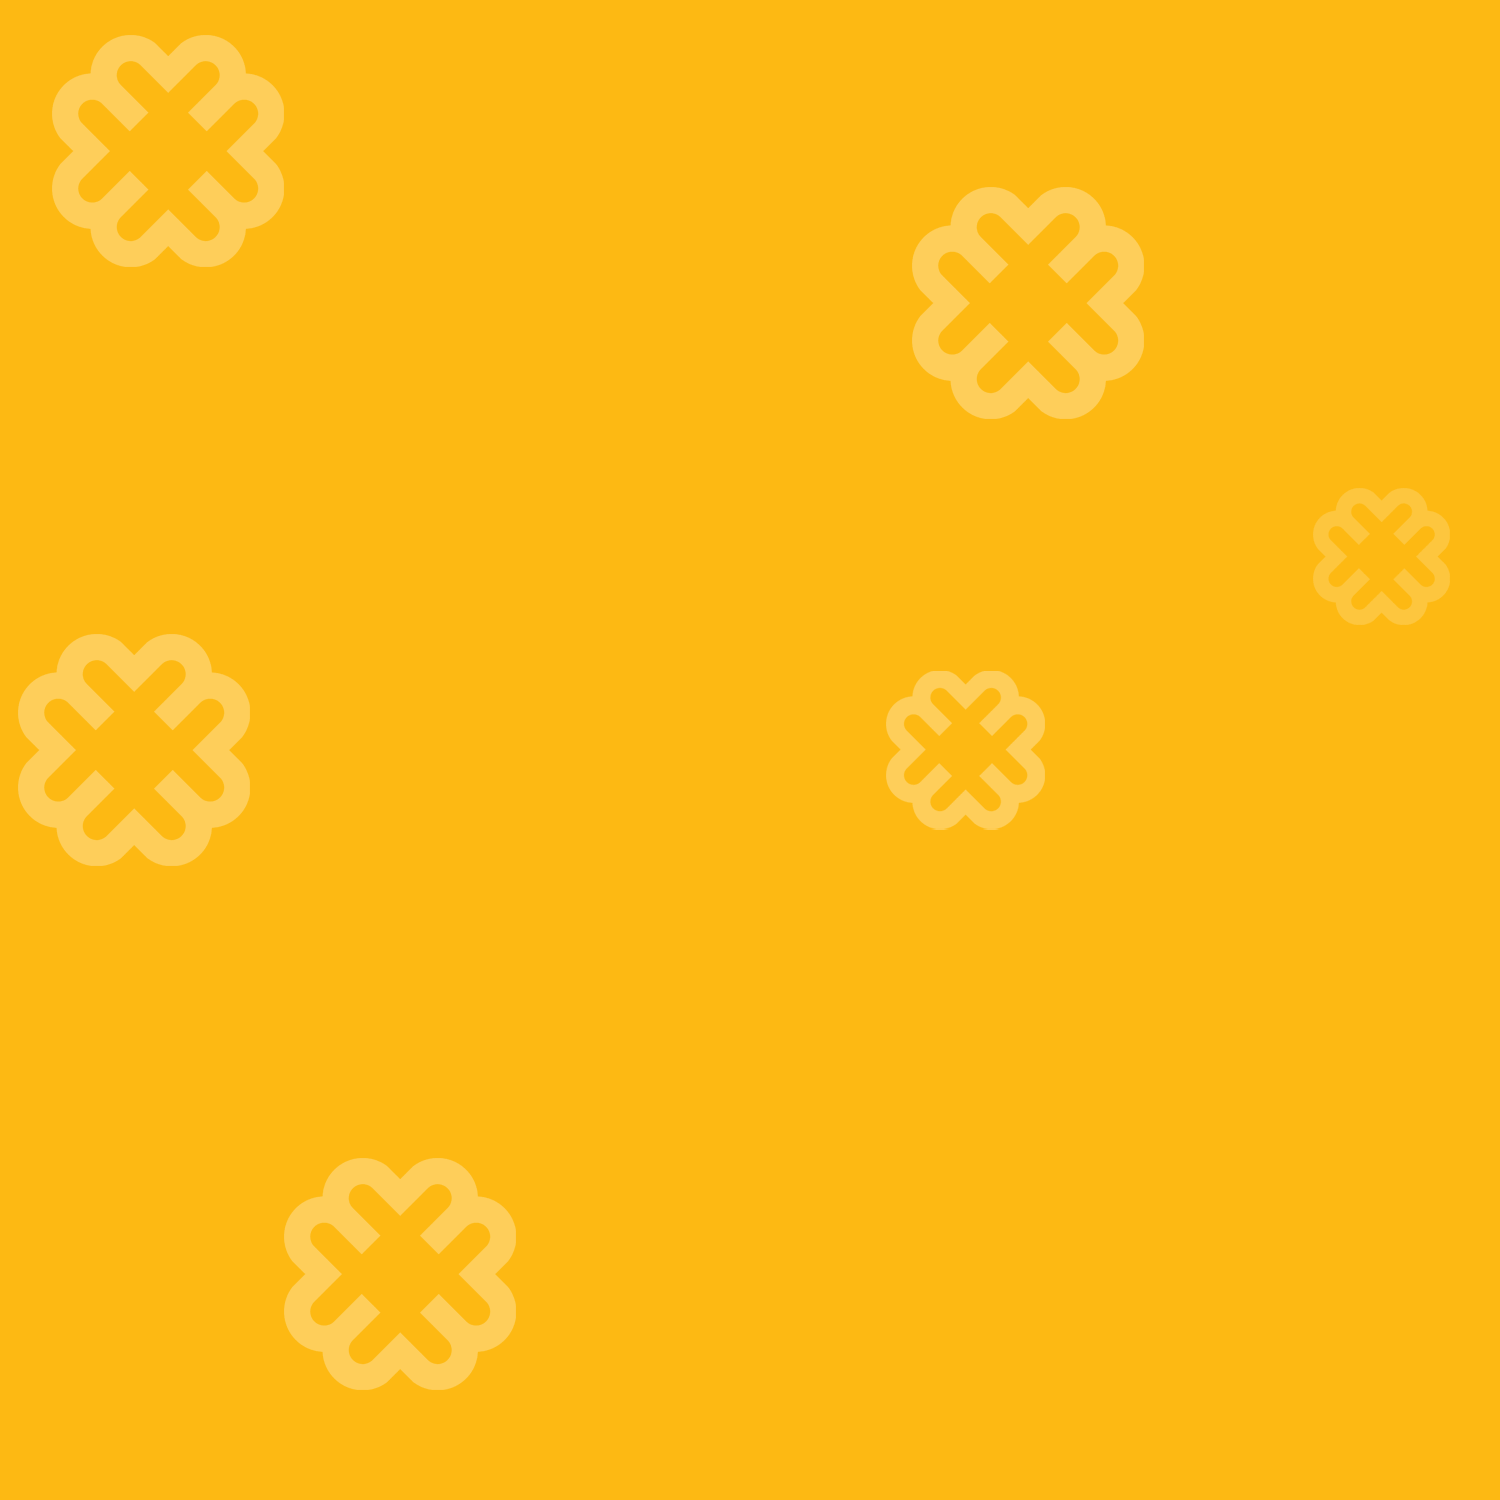 yellow background pattern with dazzly logo